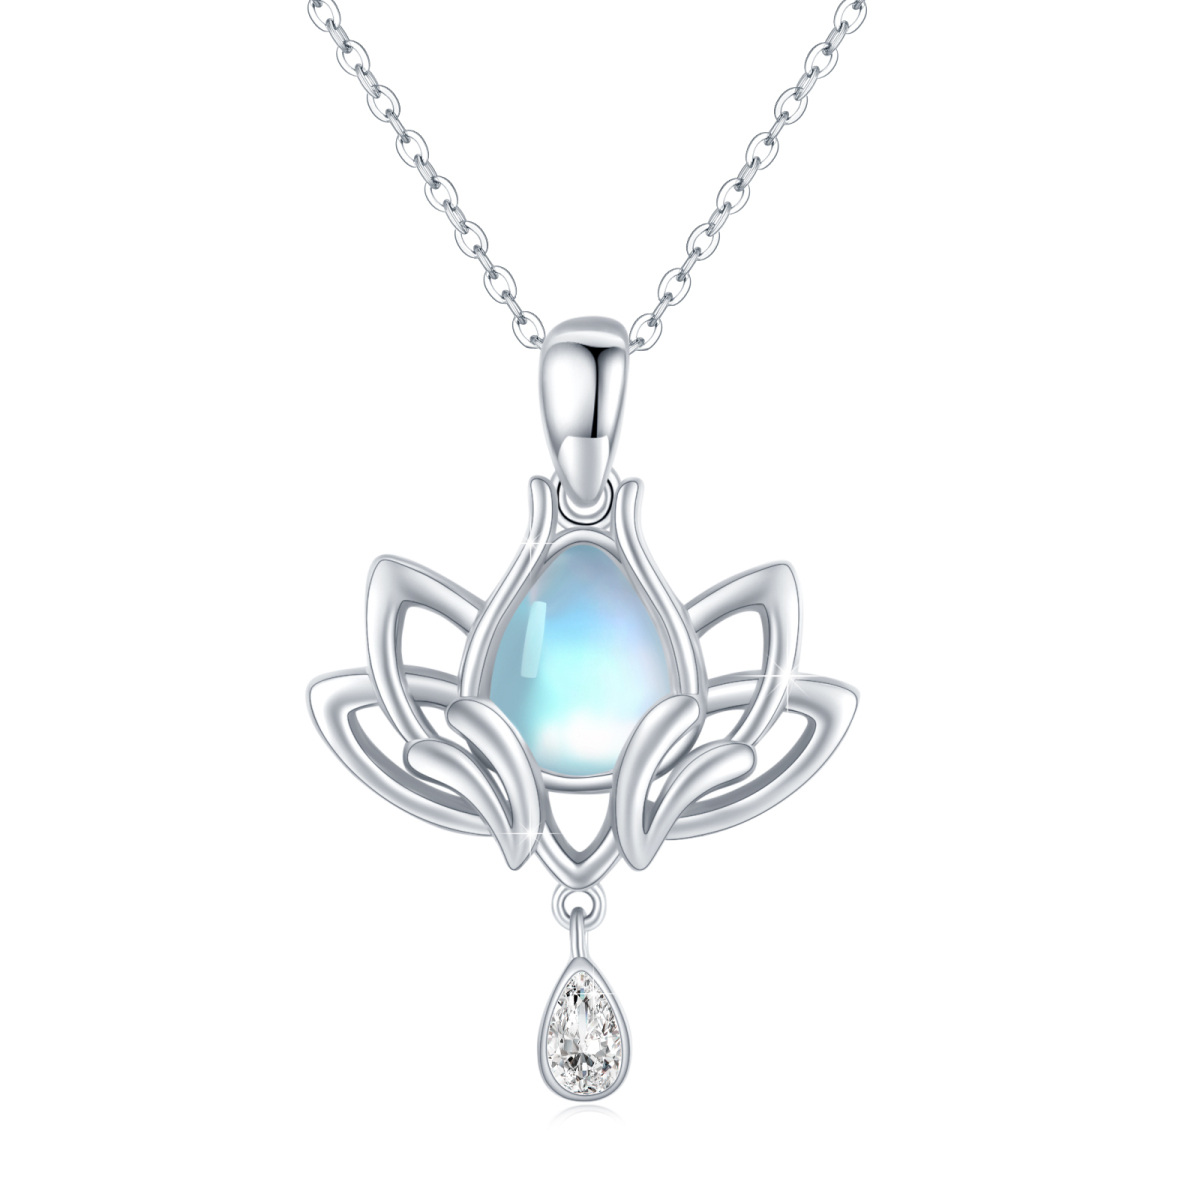 Sterling Silver Pear Shaped Cubic Zirconia & Moonstone Lotus & Drop Shape Pendant Necklace-1